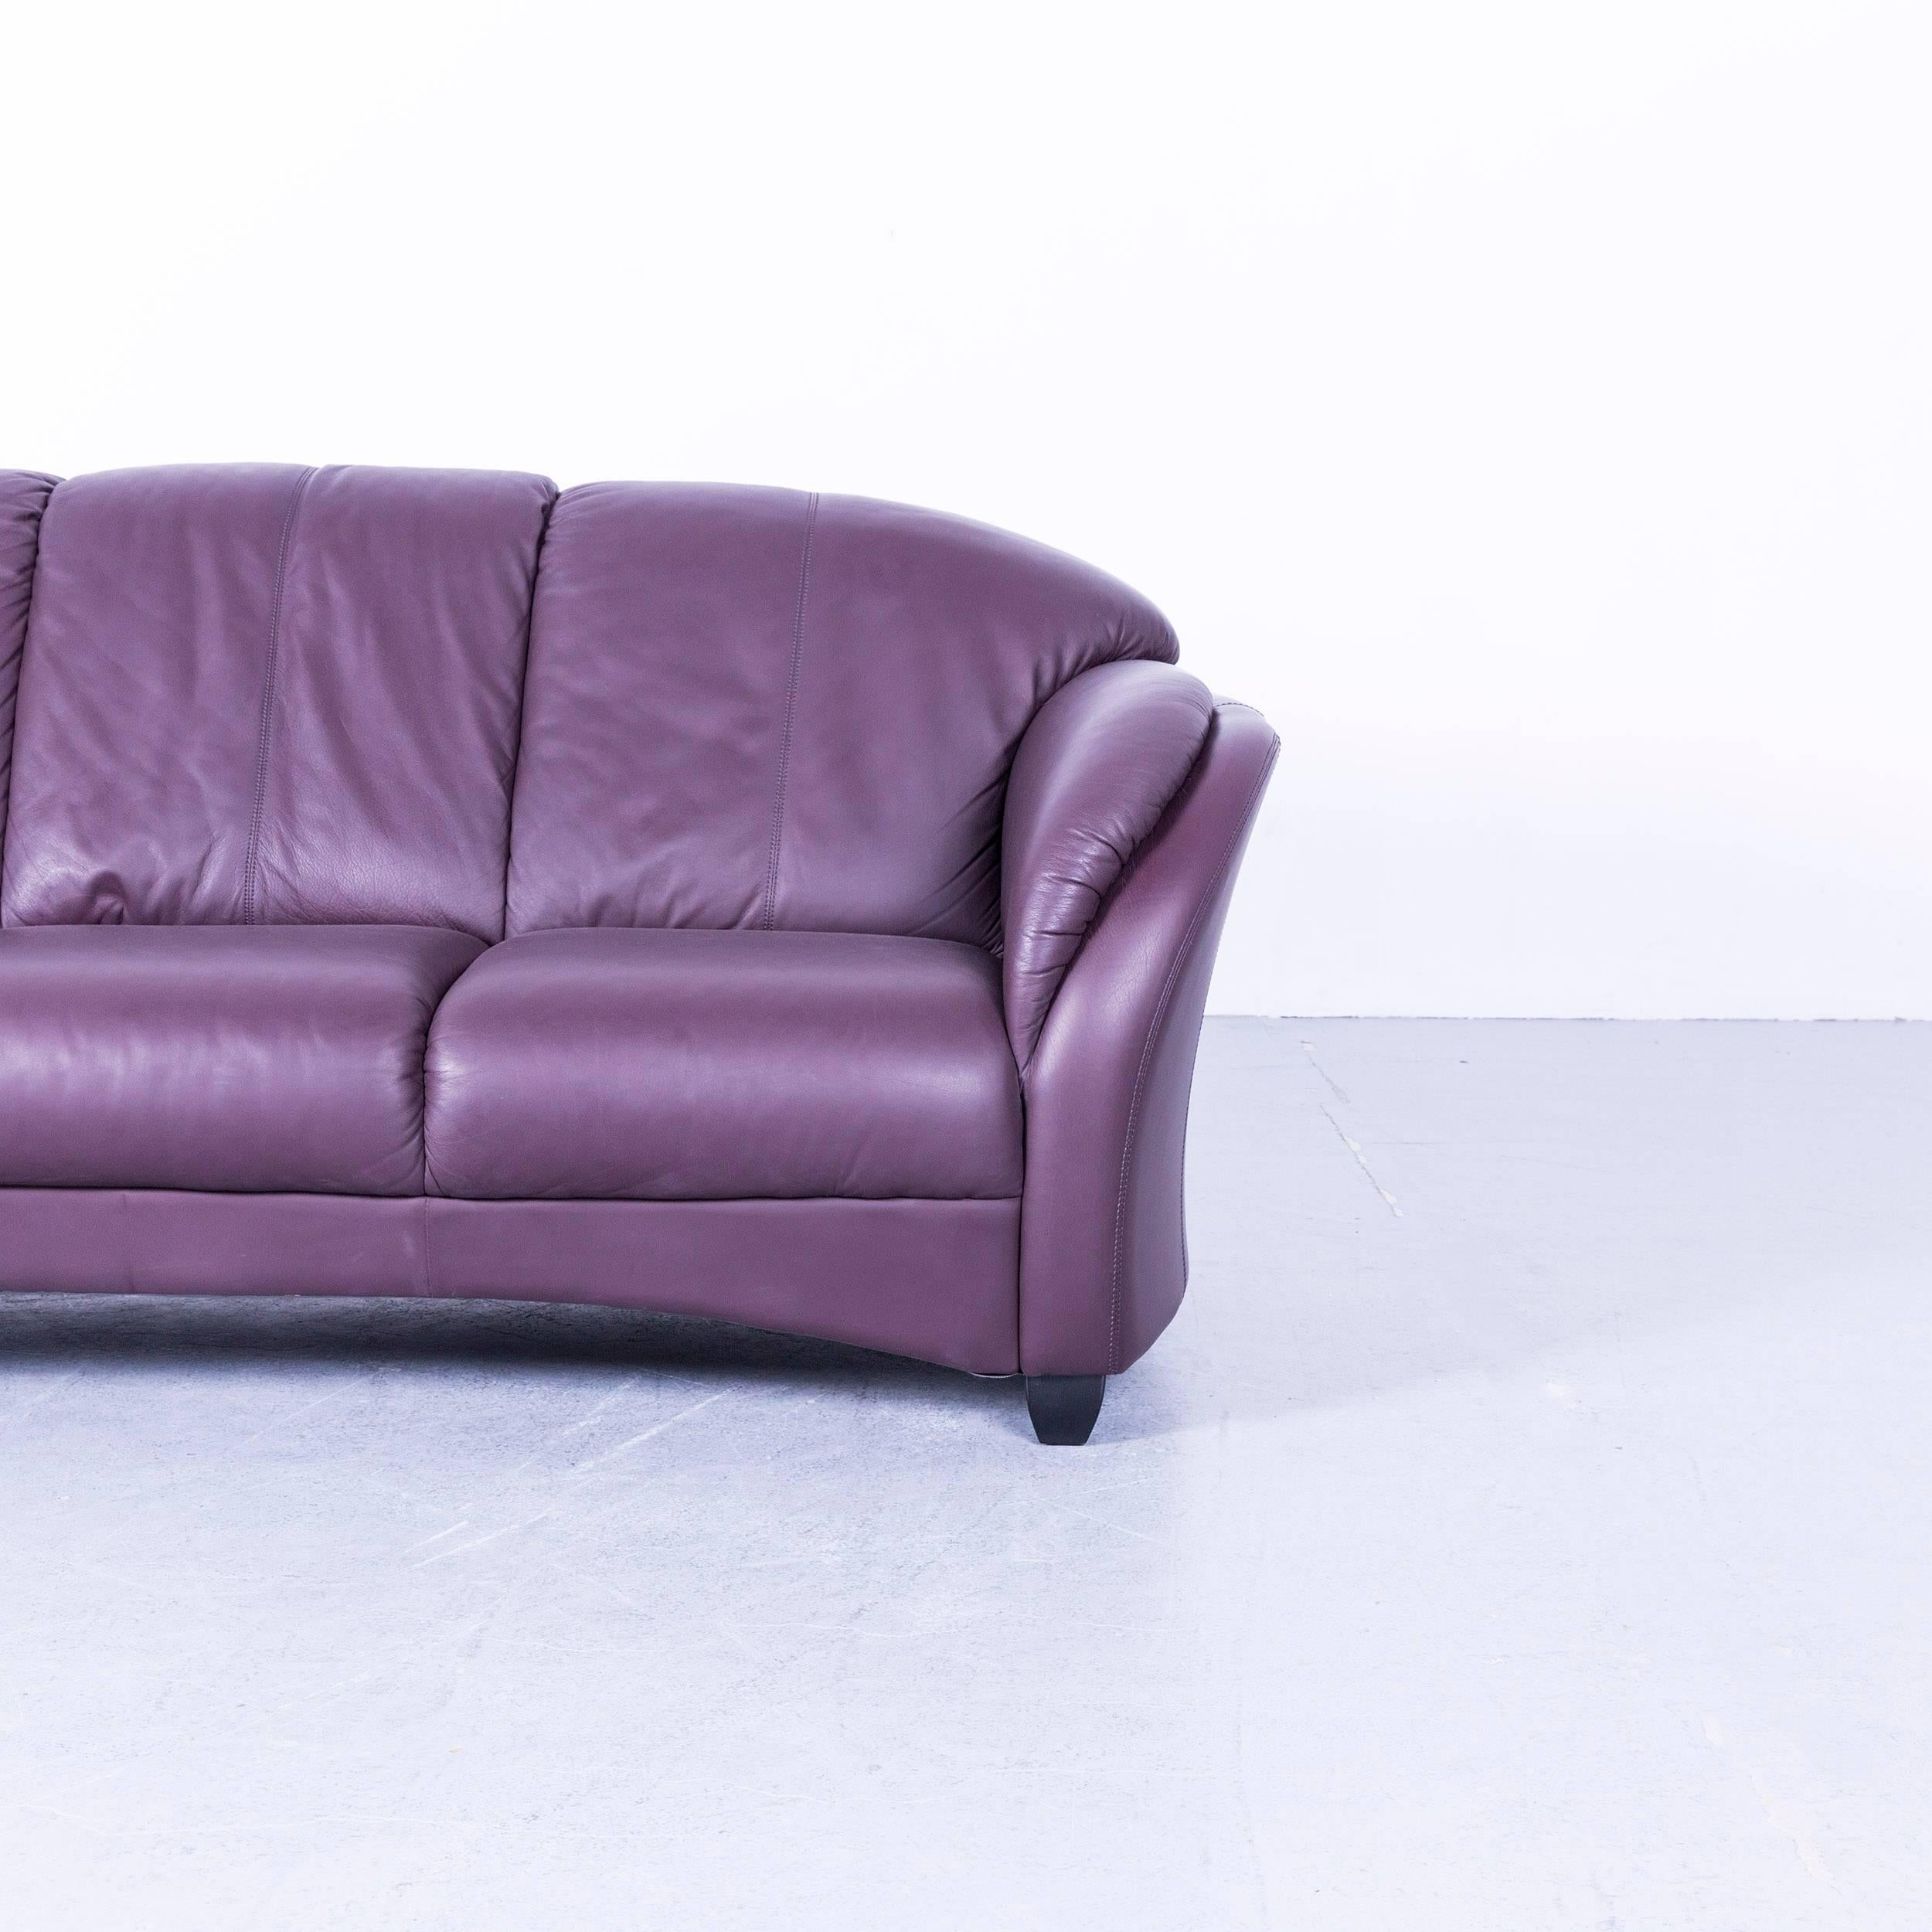 Contemporary Himolla Designer Sofa Leather Purple Three-Seat Couch Germany Modern